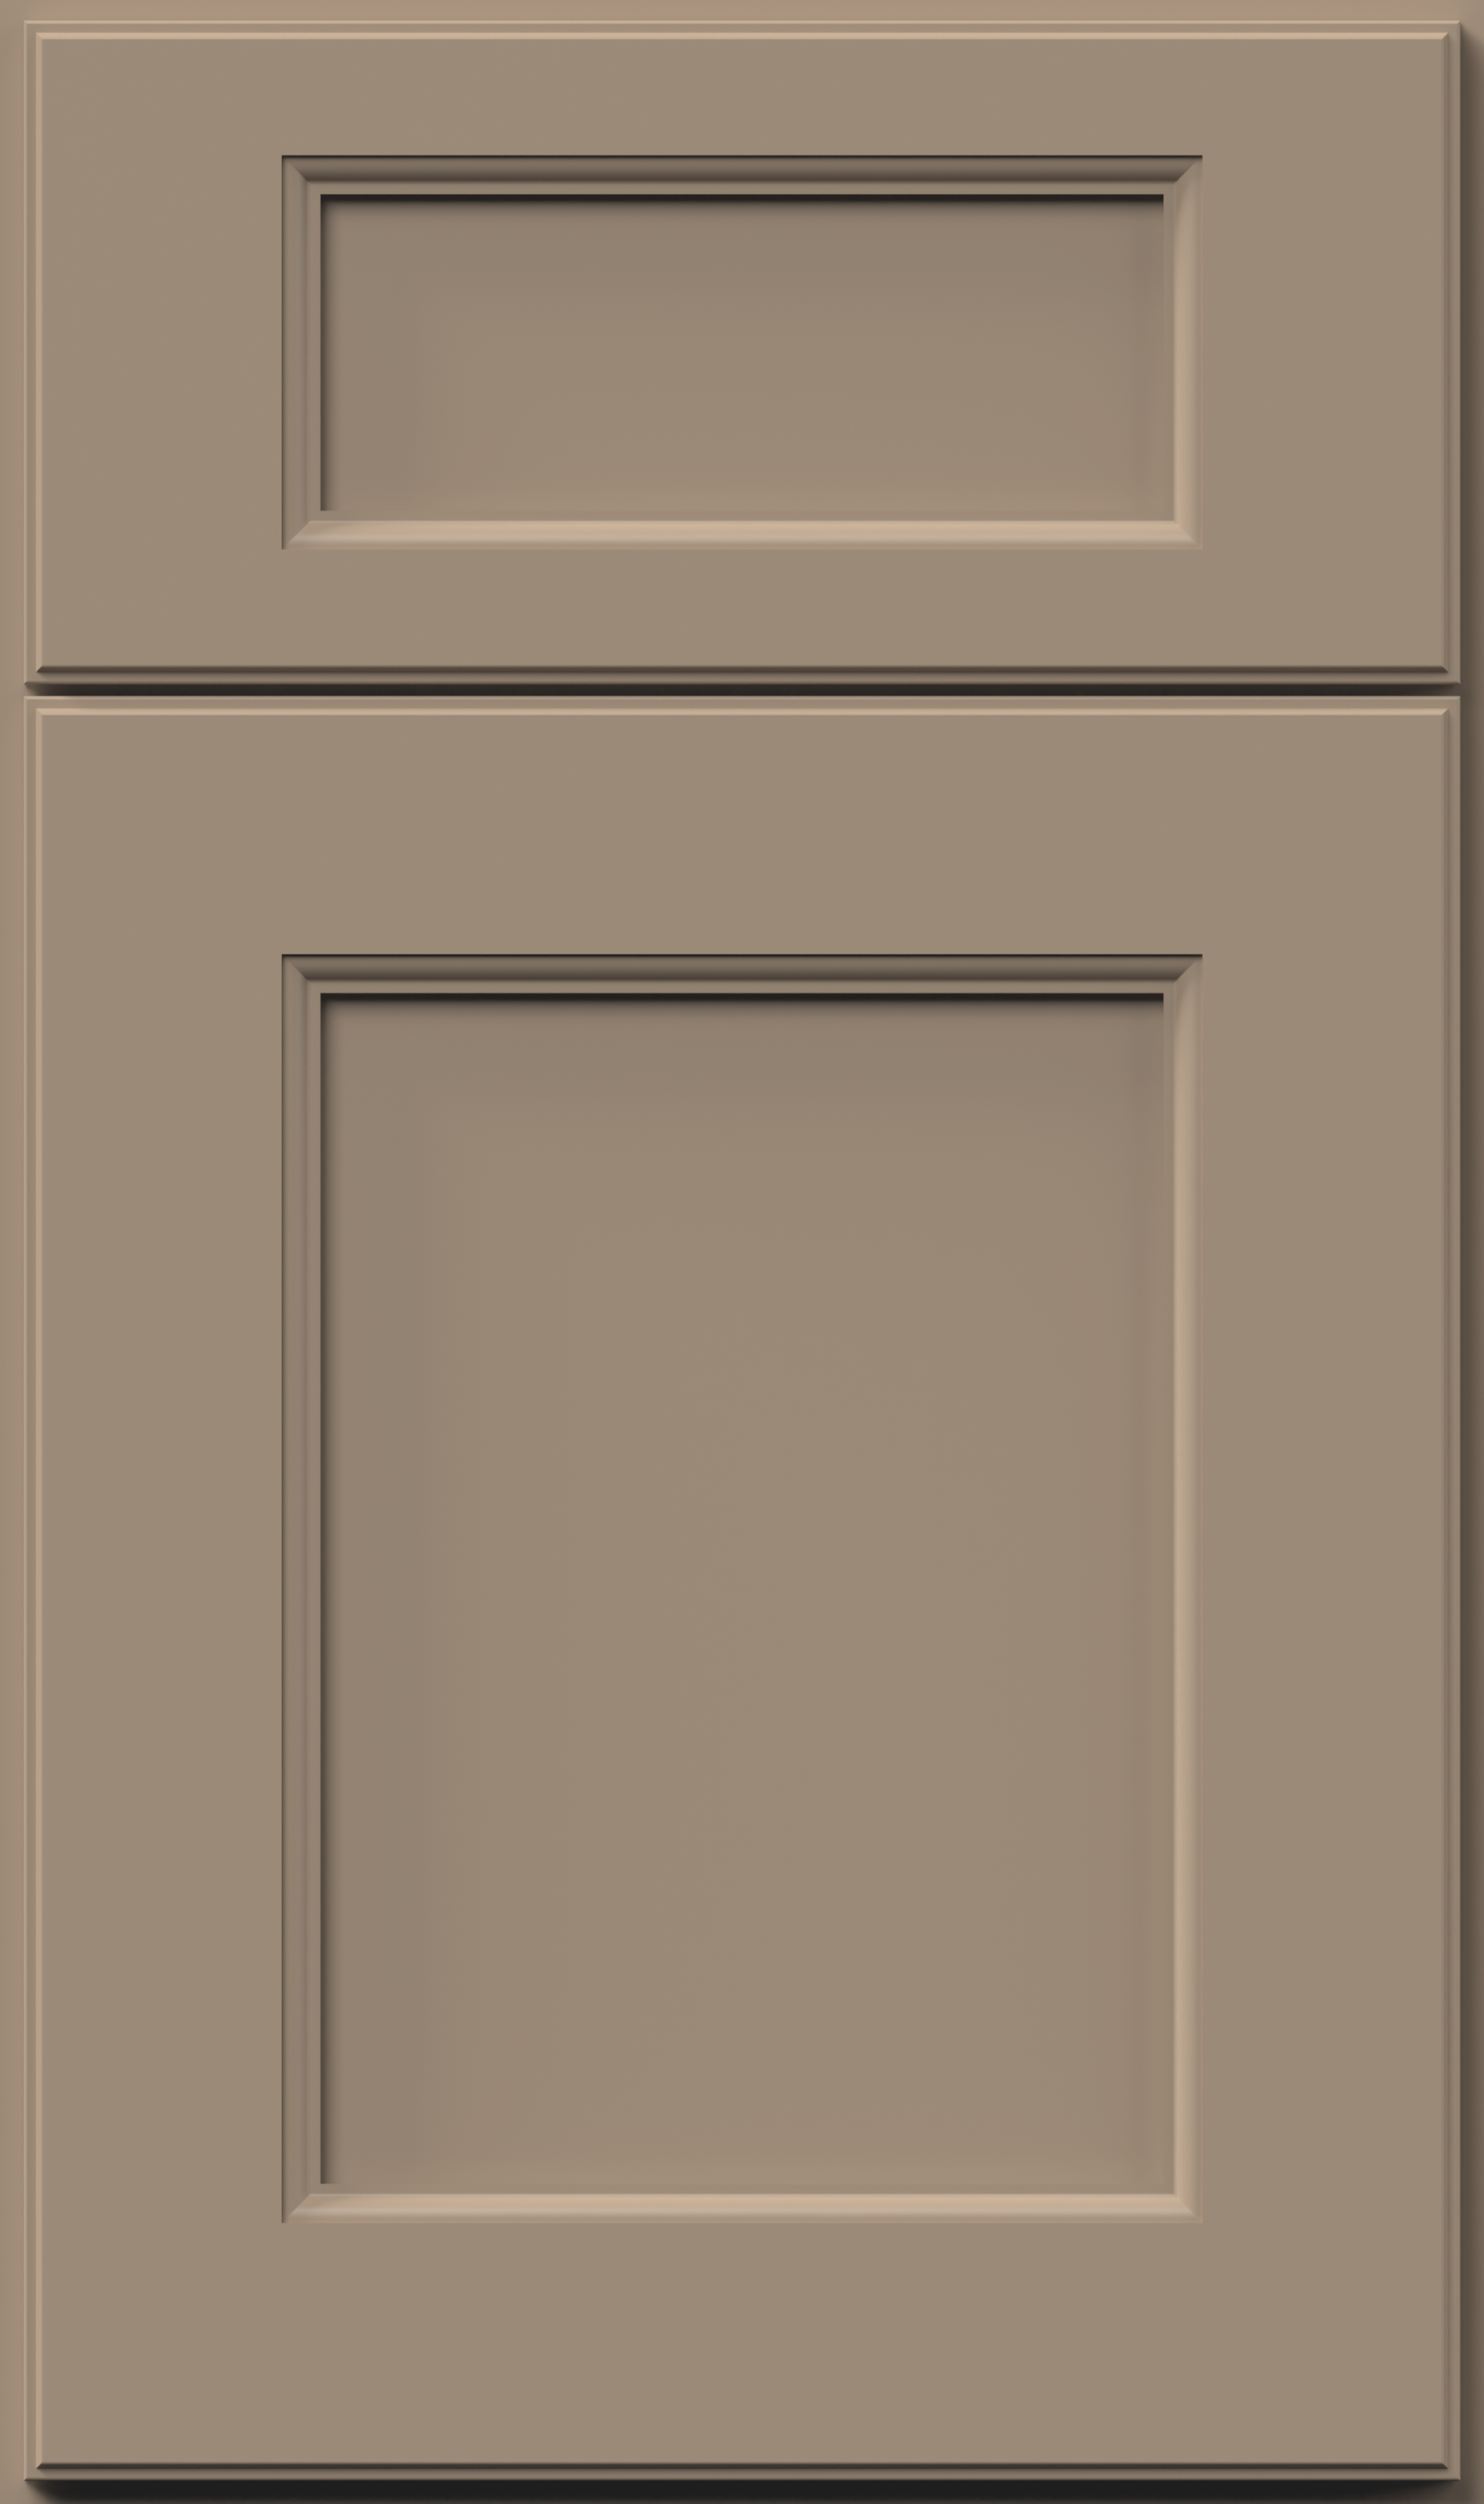 Fabuwood Cabinets - Allure Fusion Oyster